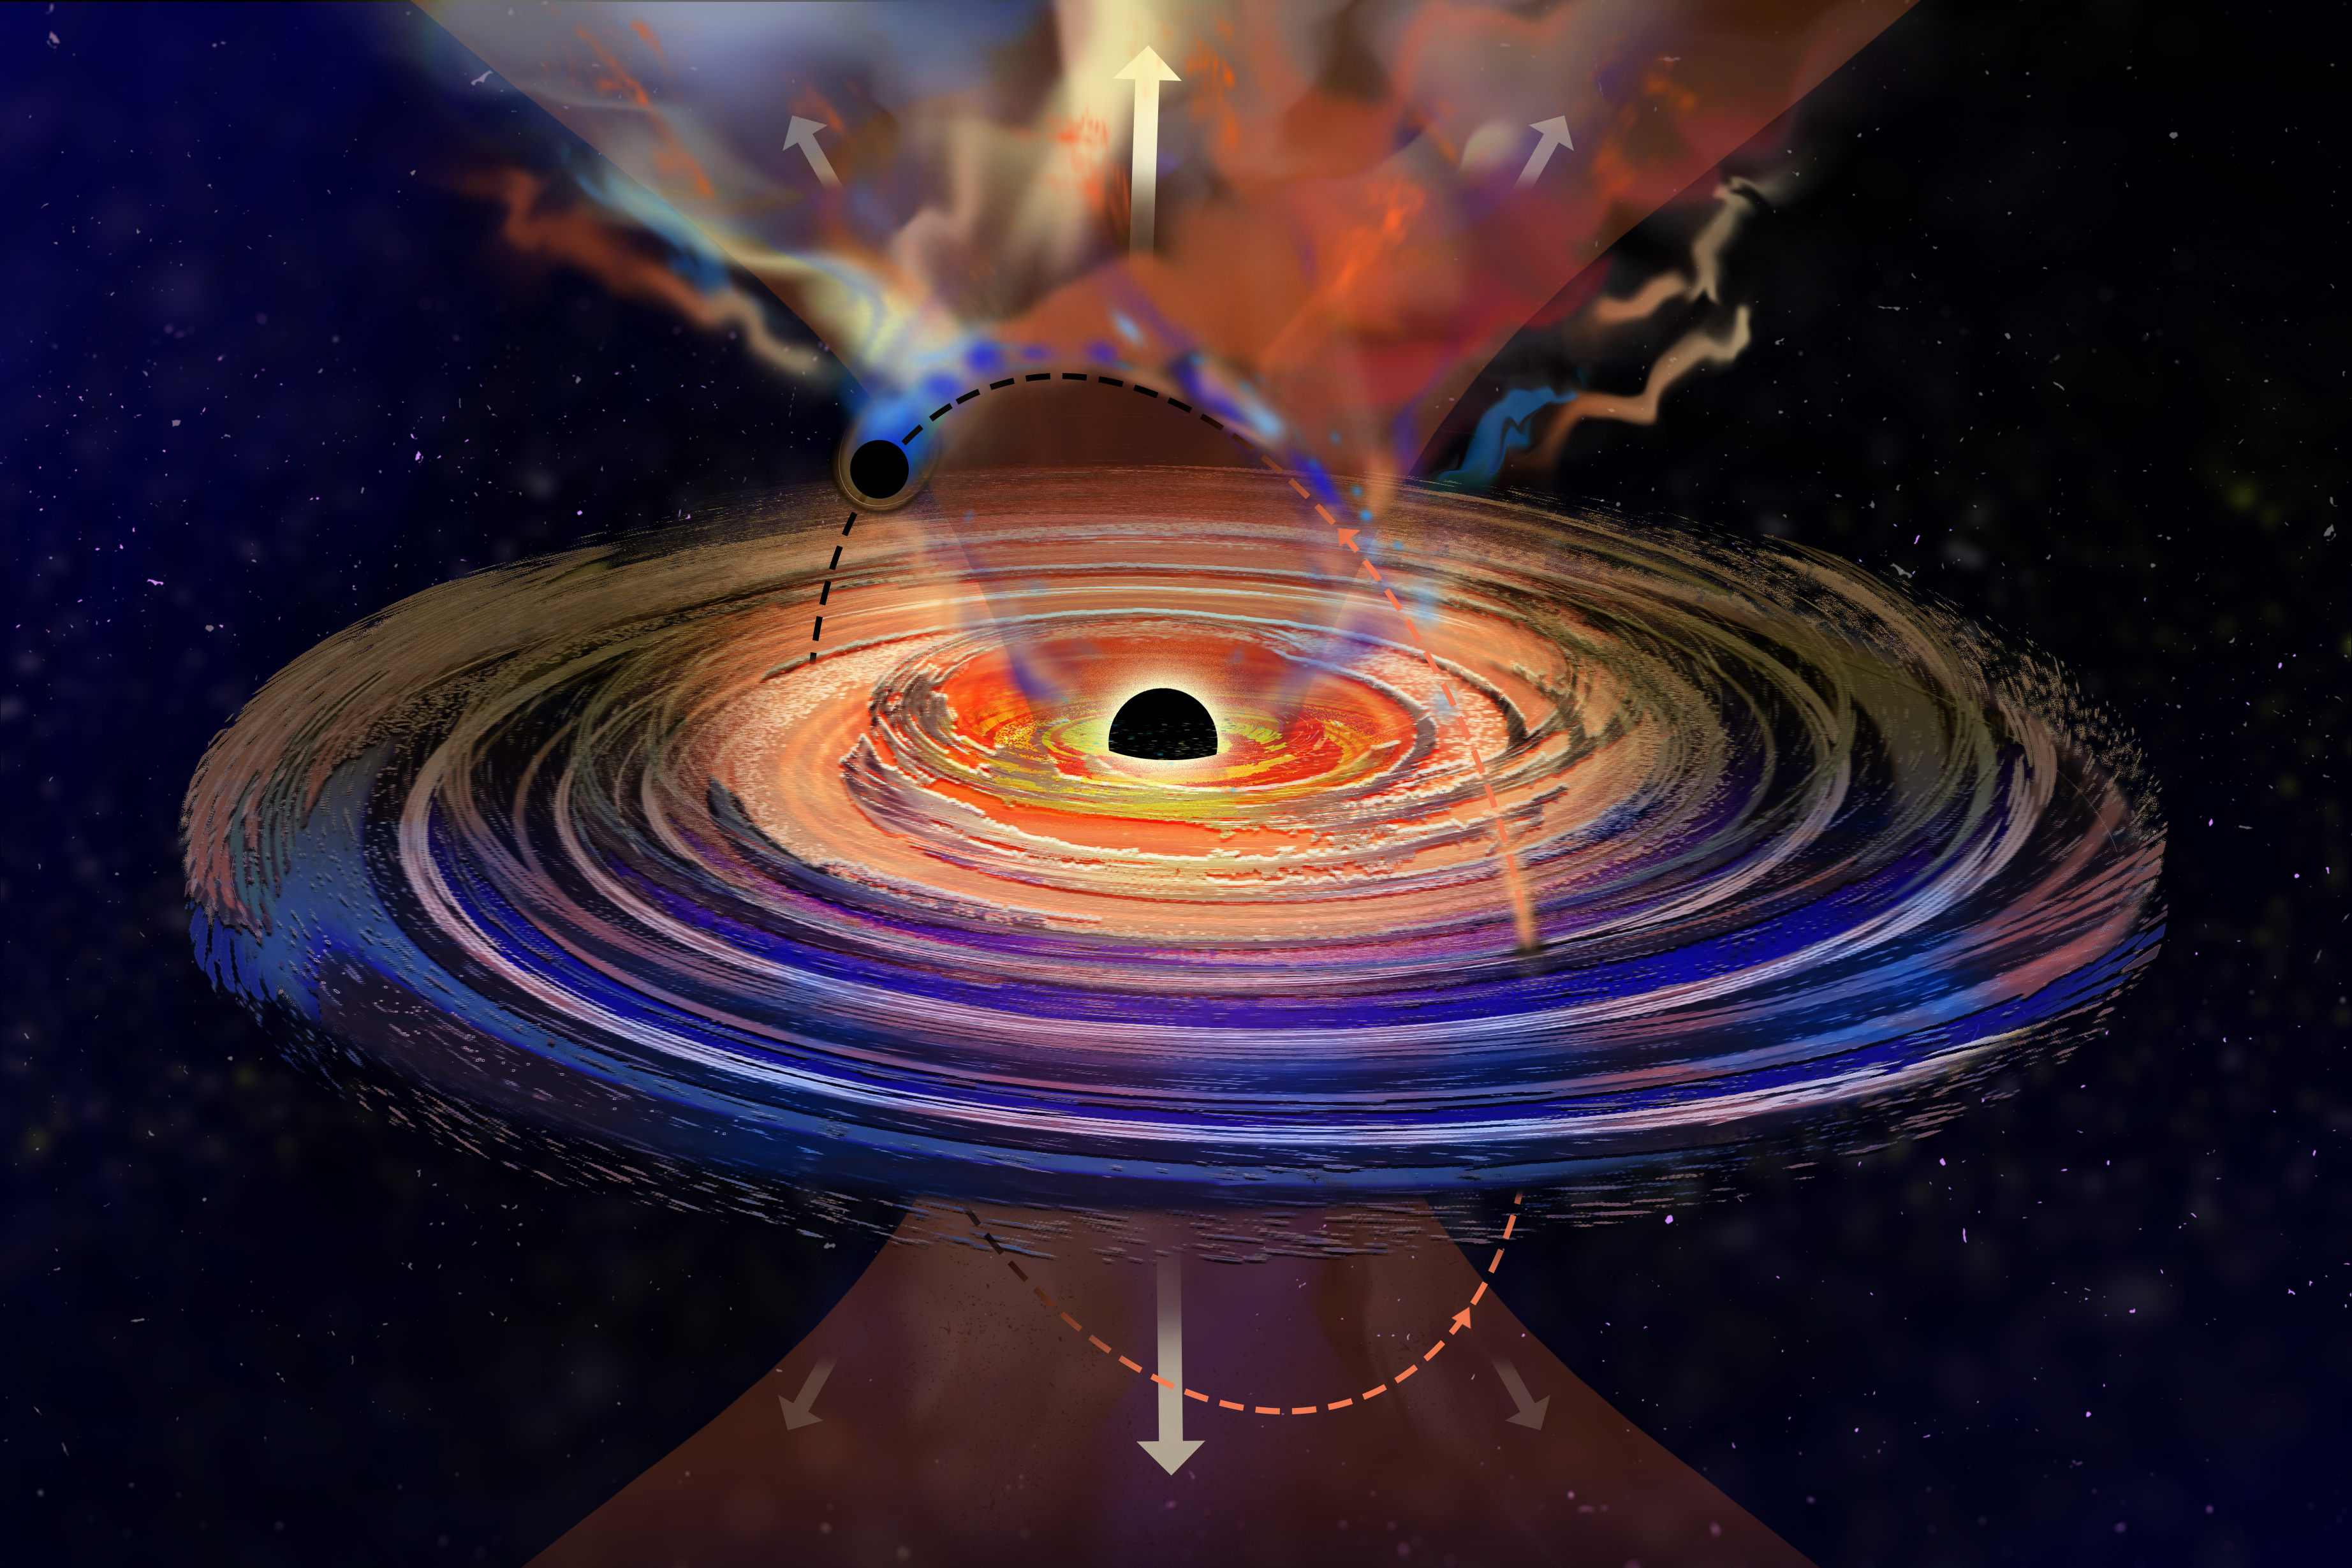 The massive black hole's outbursts are likely due to a smaller black hole repatedly punching through its accretion disk, as seen here.